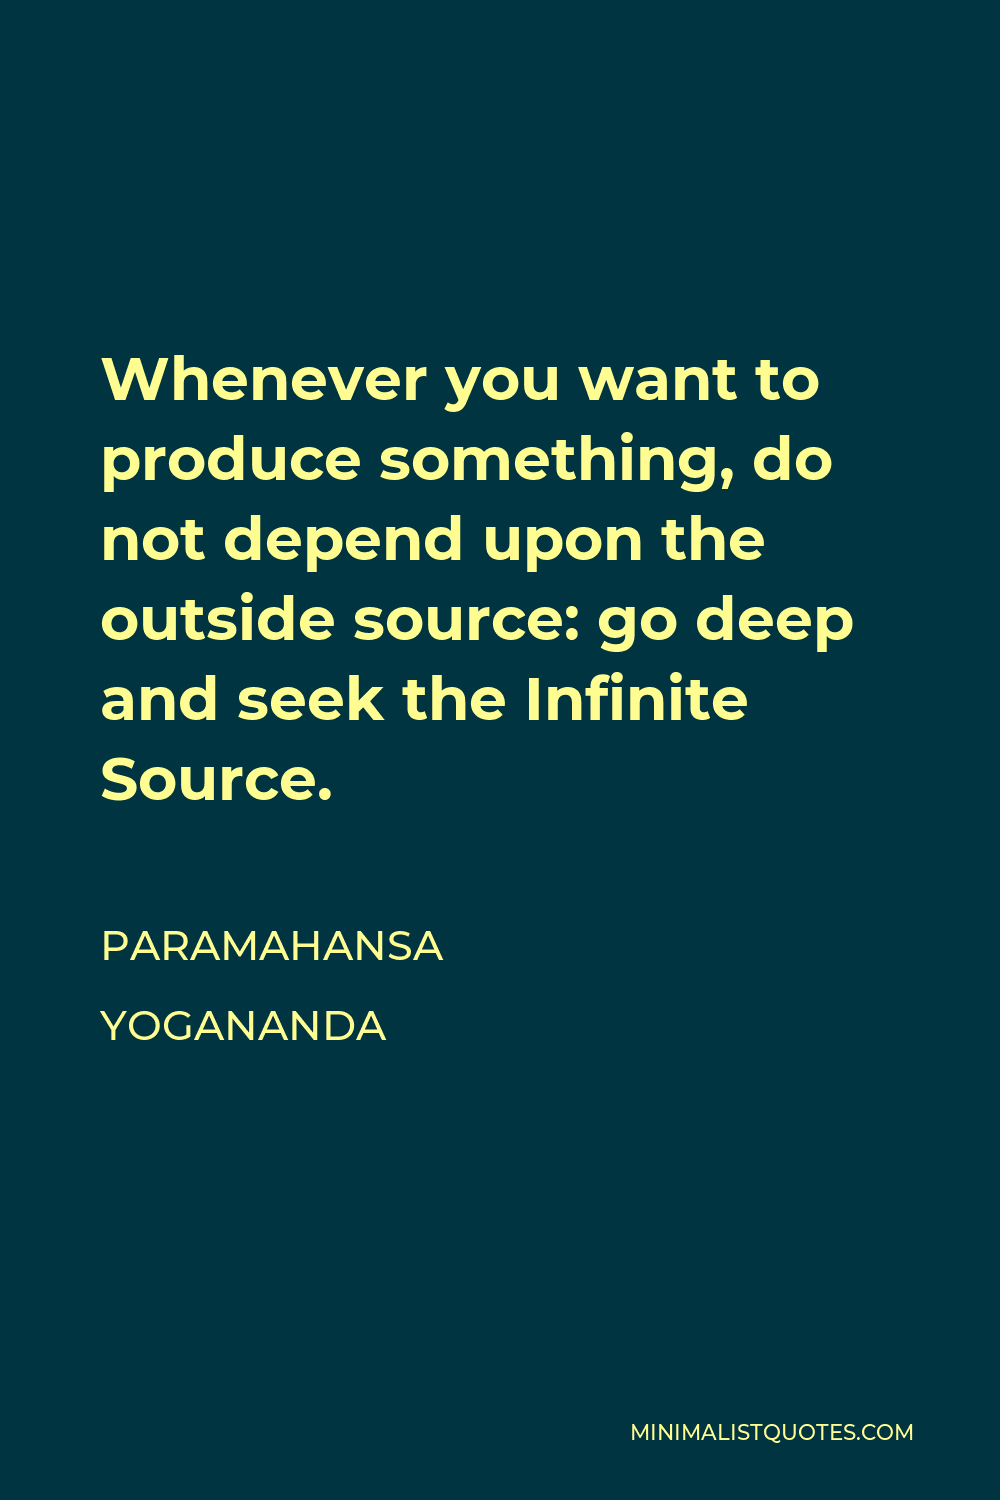 Paramahansa Yogananda Quote - Whenever you want to produce something, do not depend upon the outside source: go deep and seek the Infinite Source.